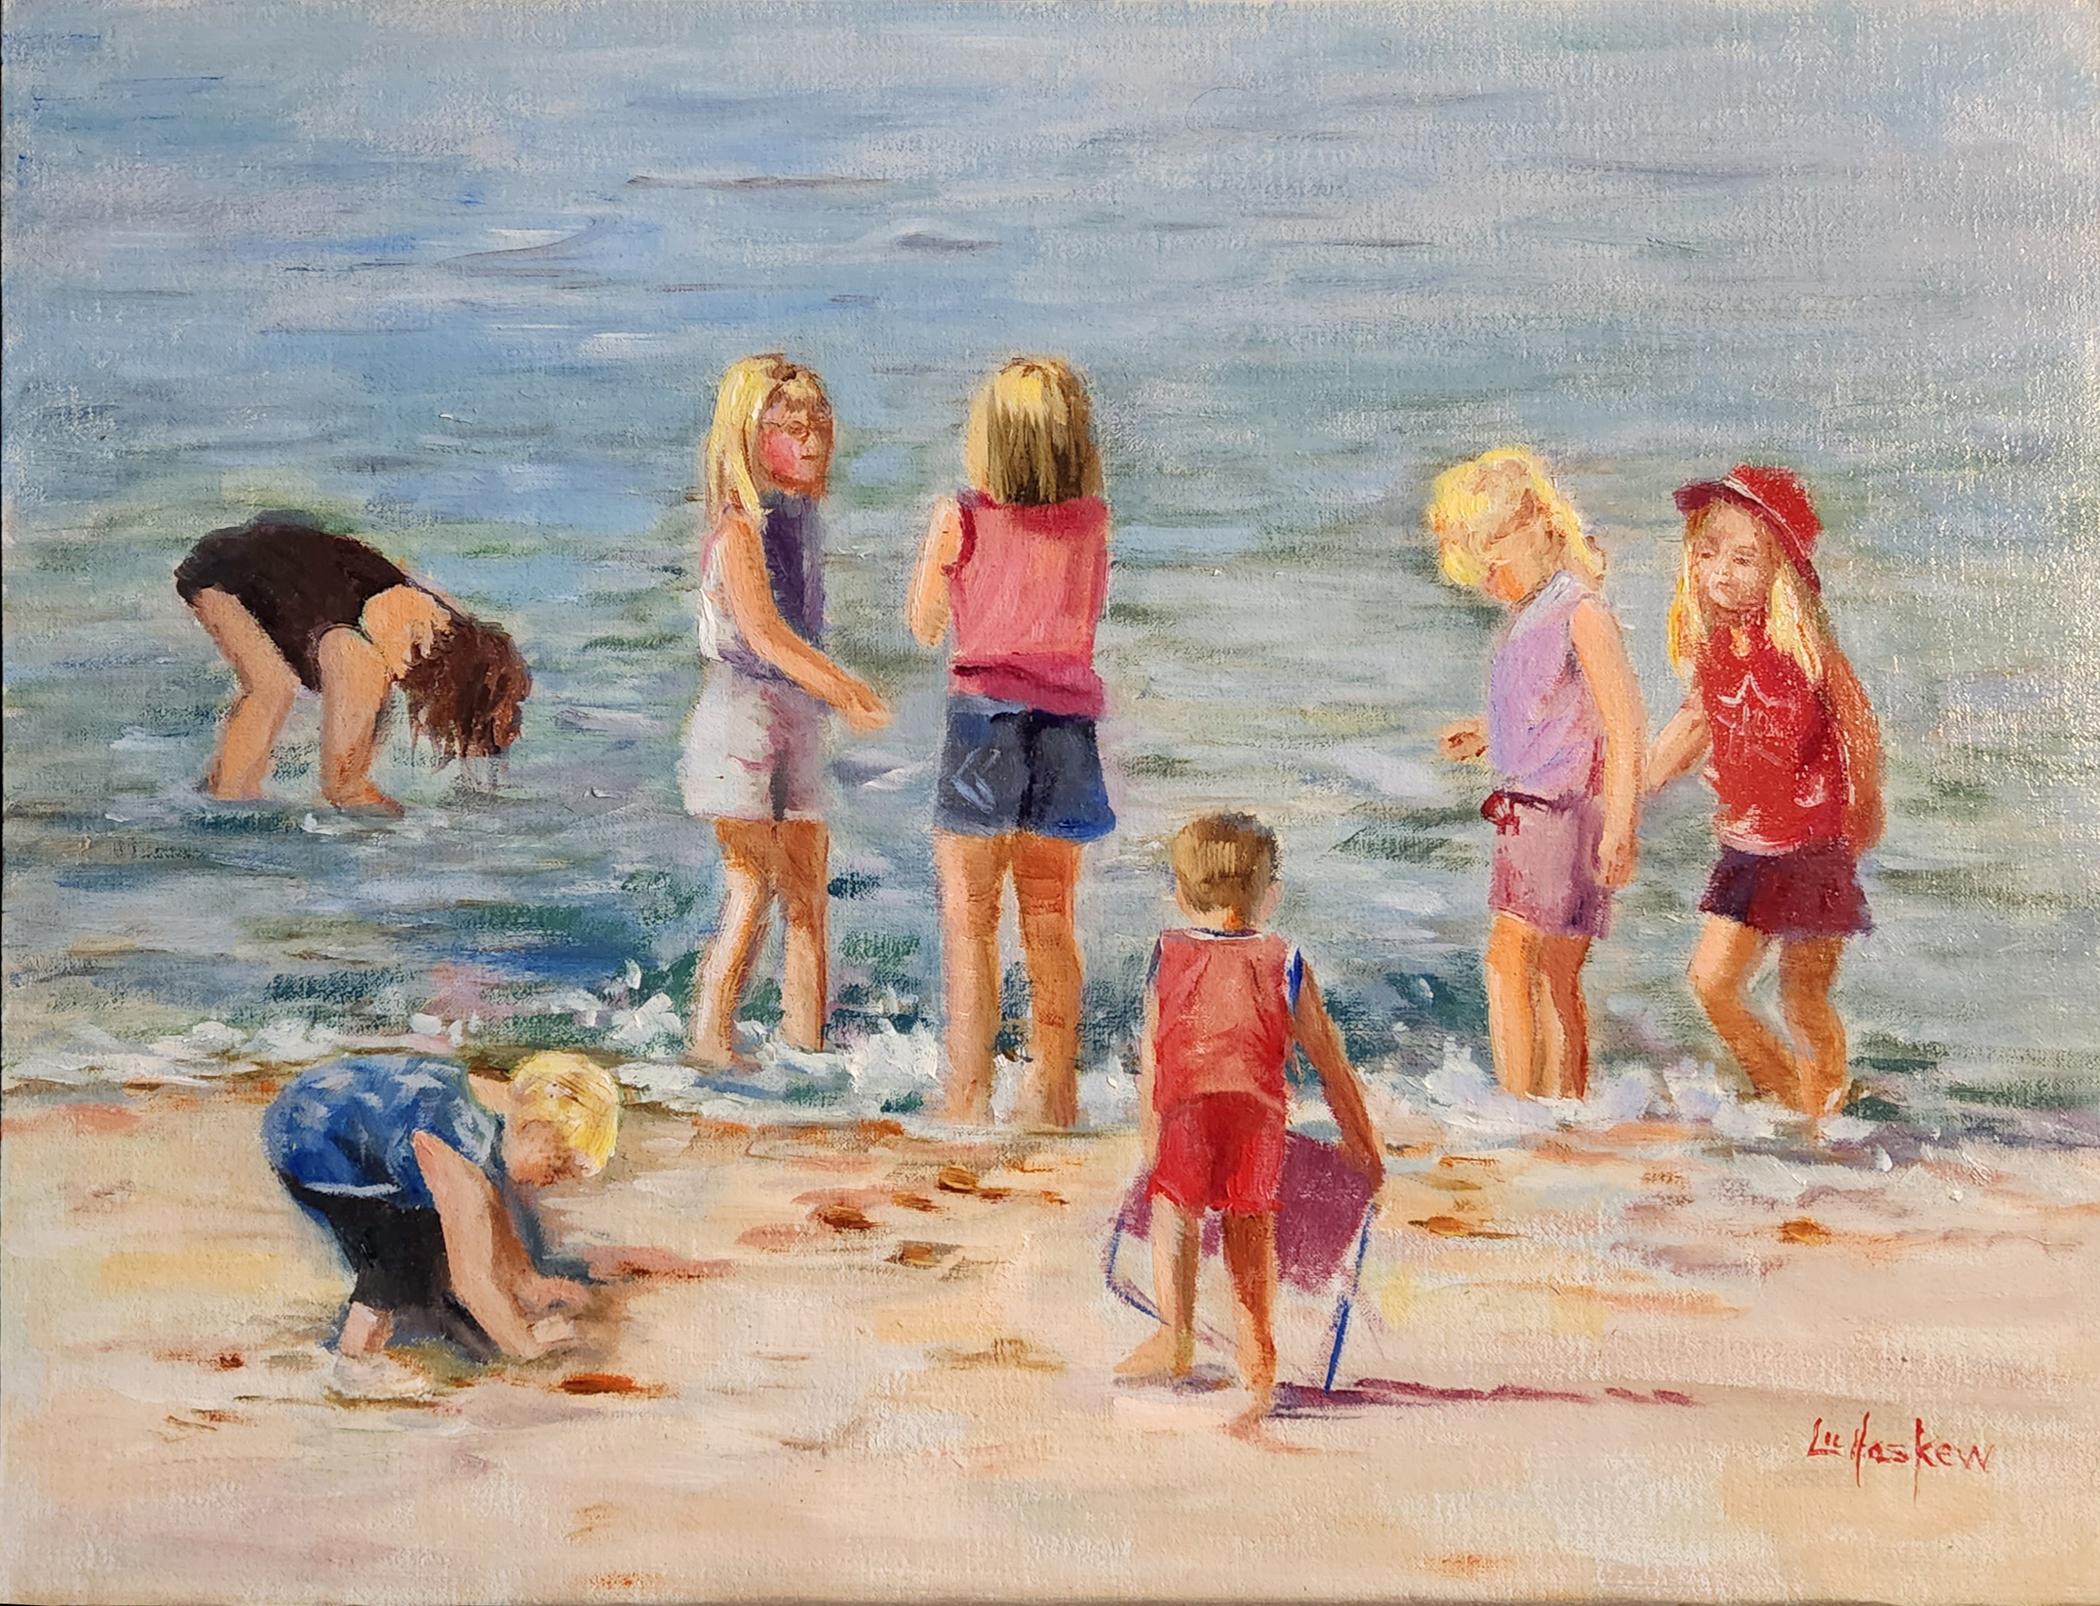 Lu Haskew Figurative Painting - Children at Beach, 12x16" oil on board